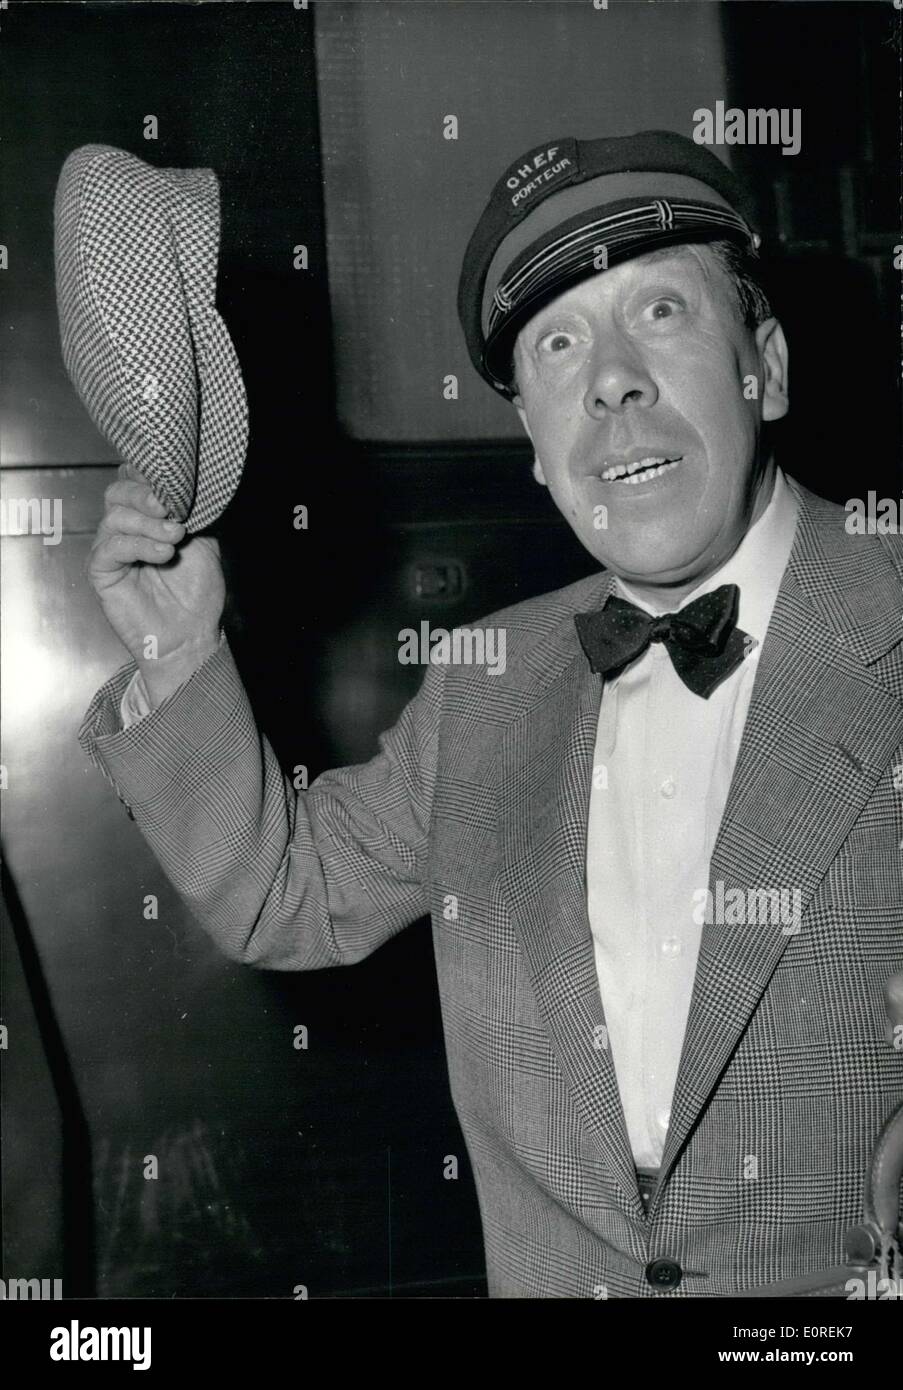 May 14, 1959 - He just got back to Paris from filming a TV series in the US and will leave for Munich soon to film ''The Cow & the Prisoner'' under the direction of Henri Verneuil. Stock Photo